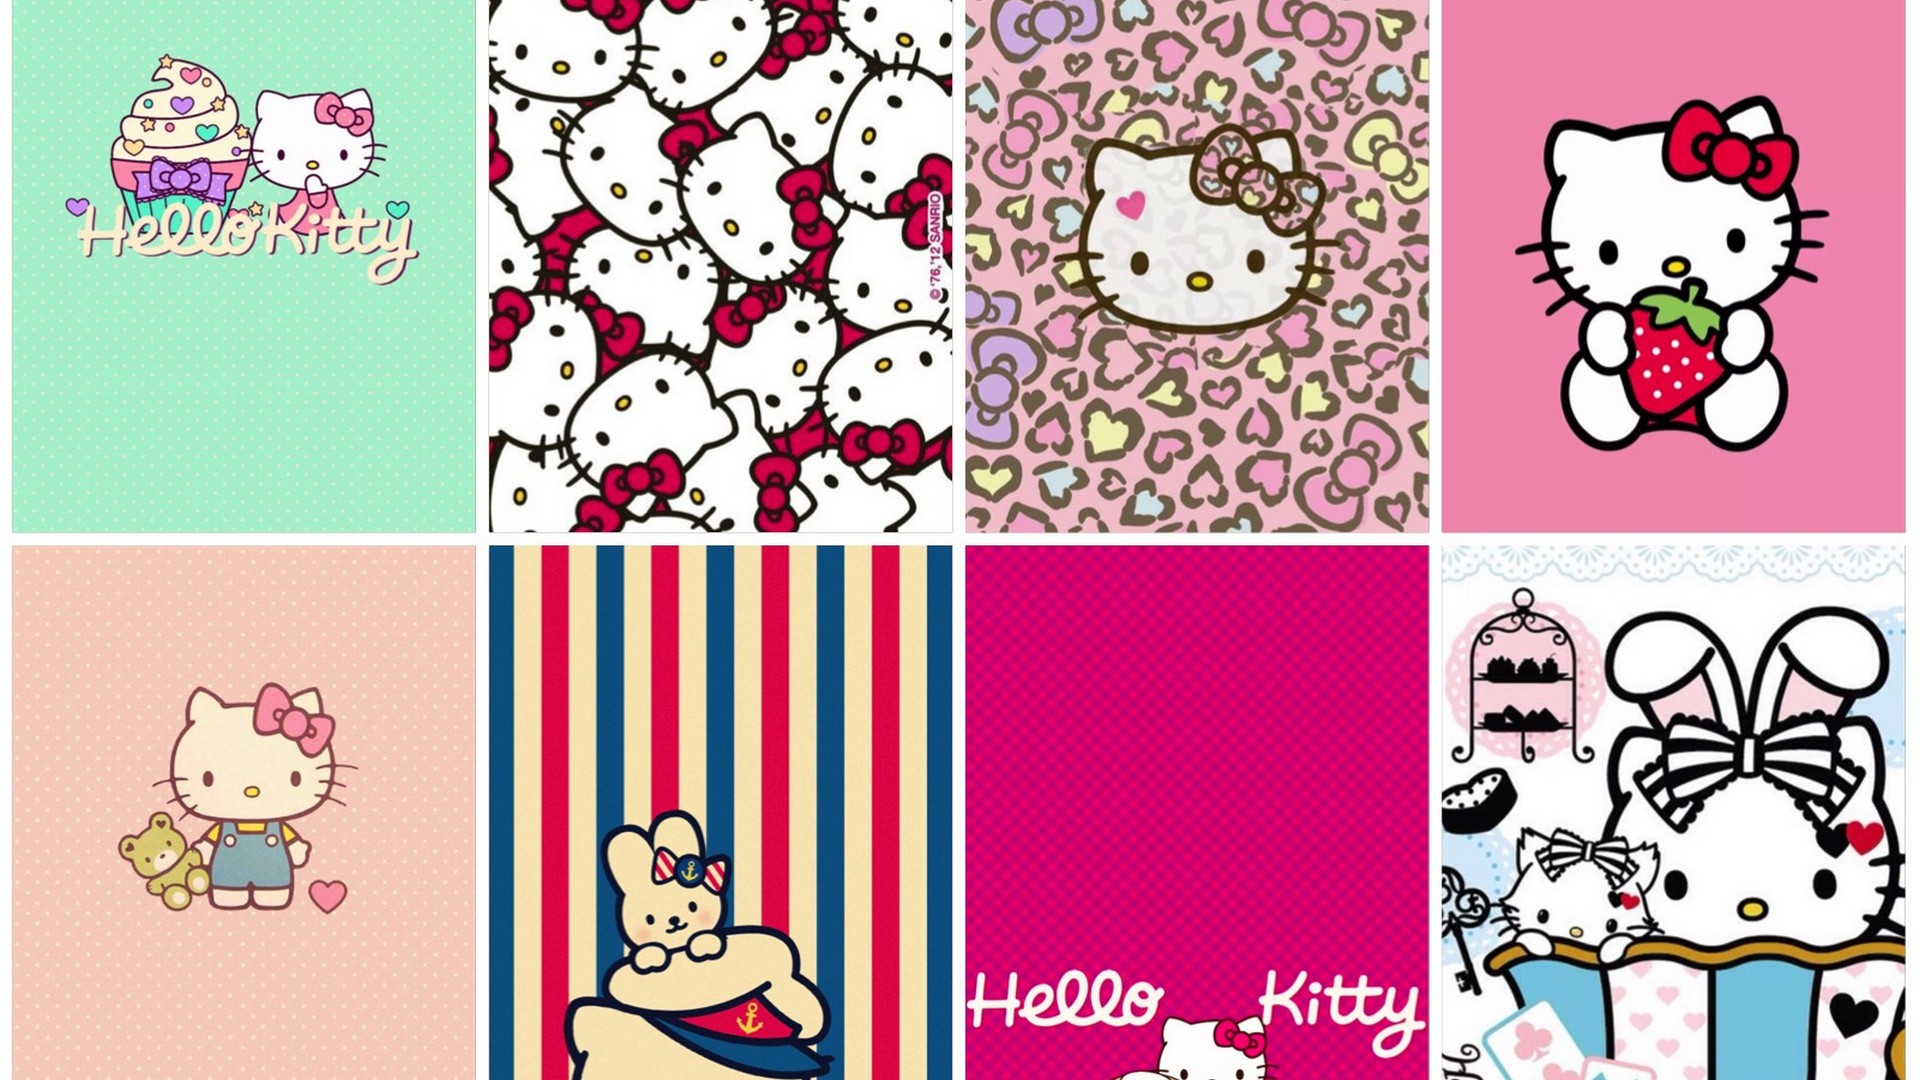 Hello Kitty Characters HD Wallpaper with image resolution 1920x1080 pixel. You can make this wallpaper for your Desktop Computer Backgrounds, Mac Wallpapers, Android Lock screen or iPhone Screensavers